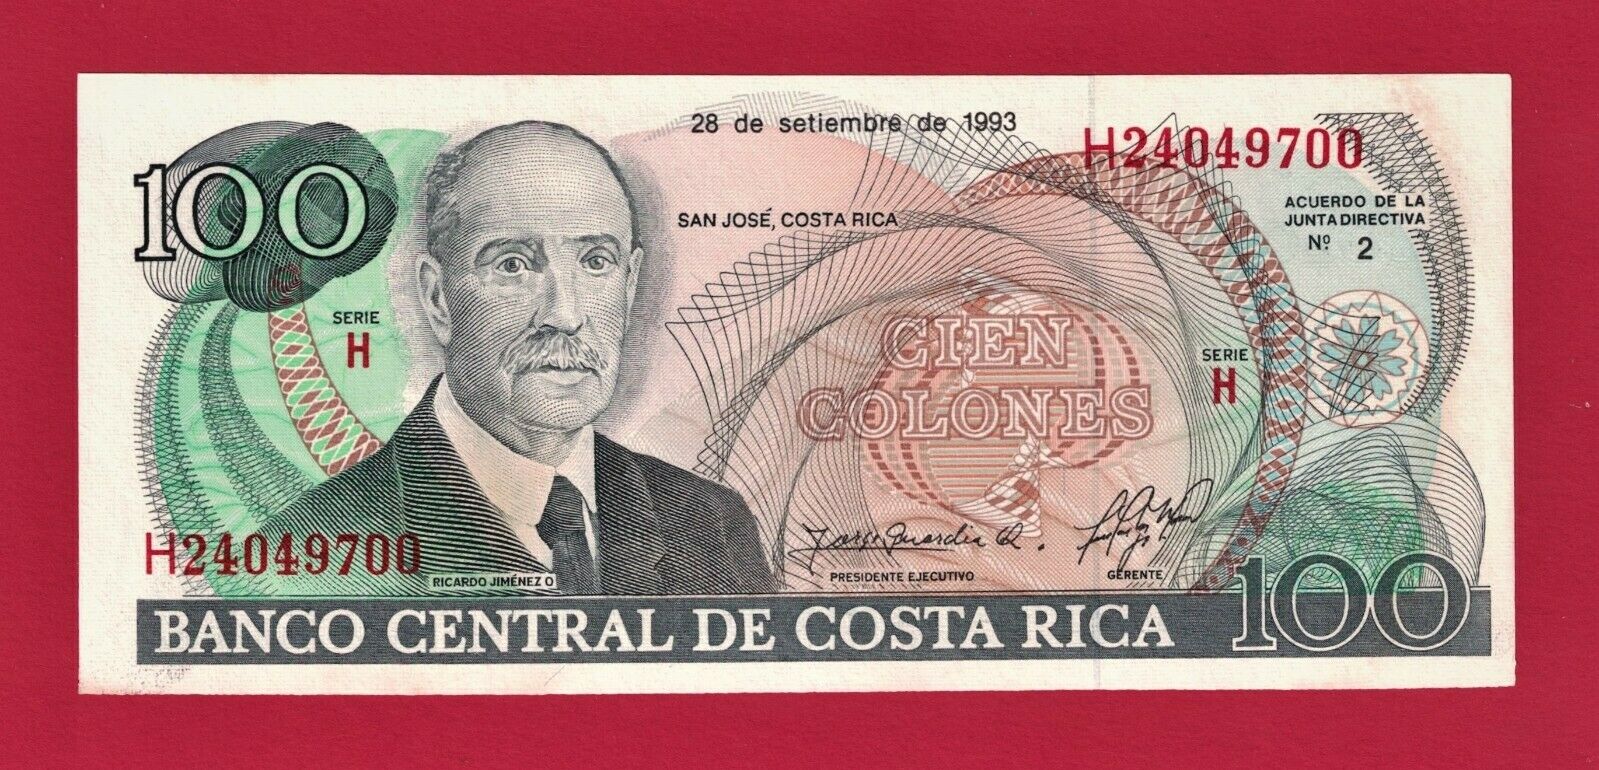 Rare 100 Cien Colones 1993 Costa Rica Unc Note (p-261a) 1st Issue In The Series